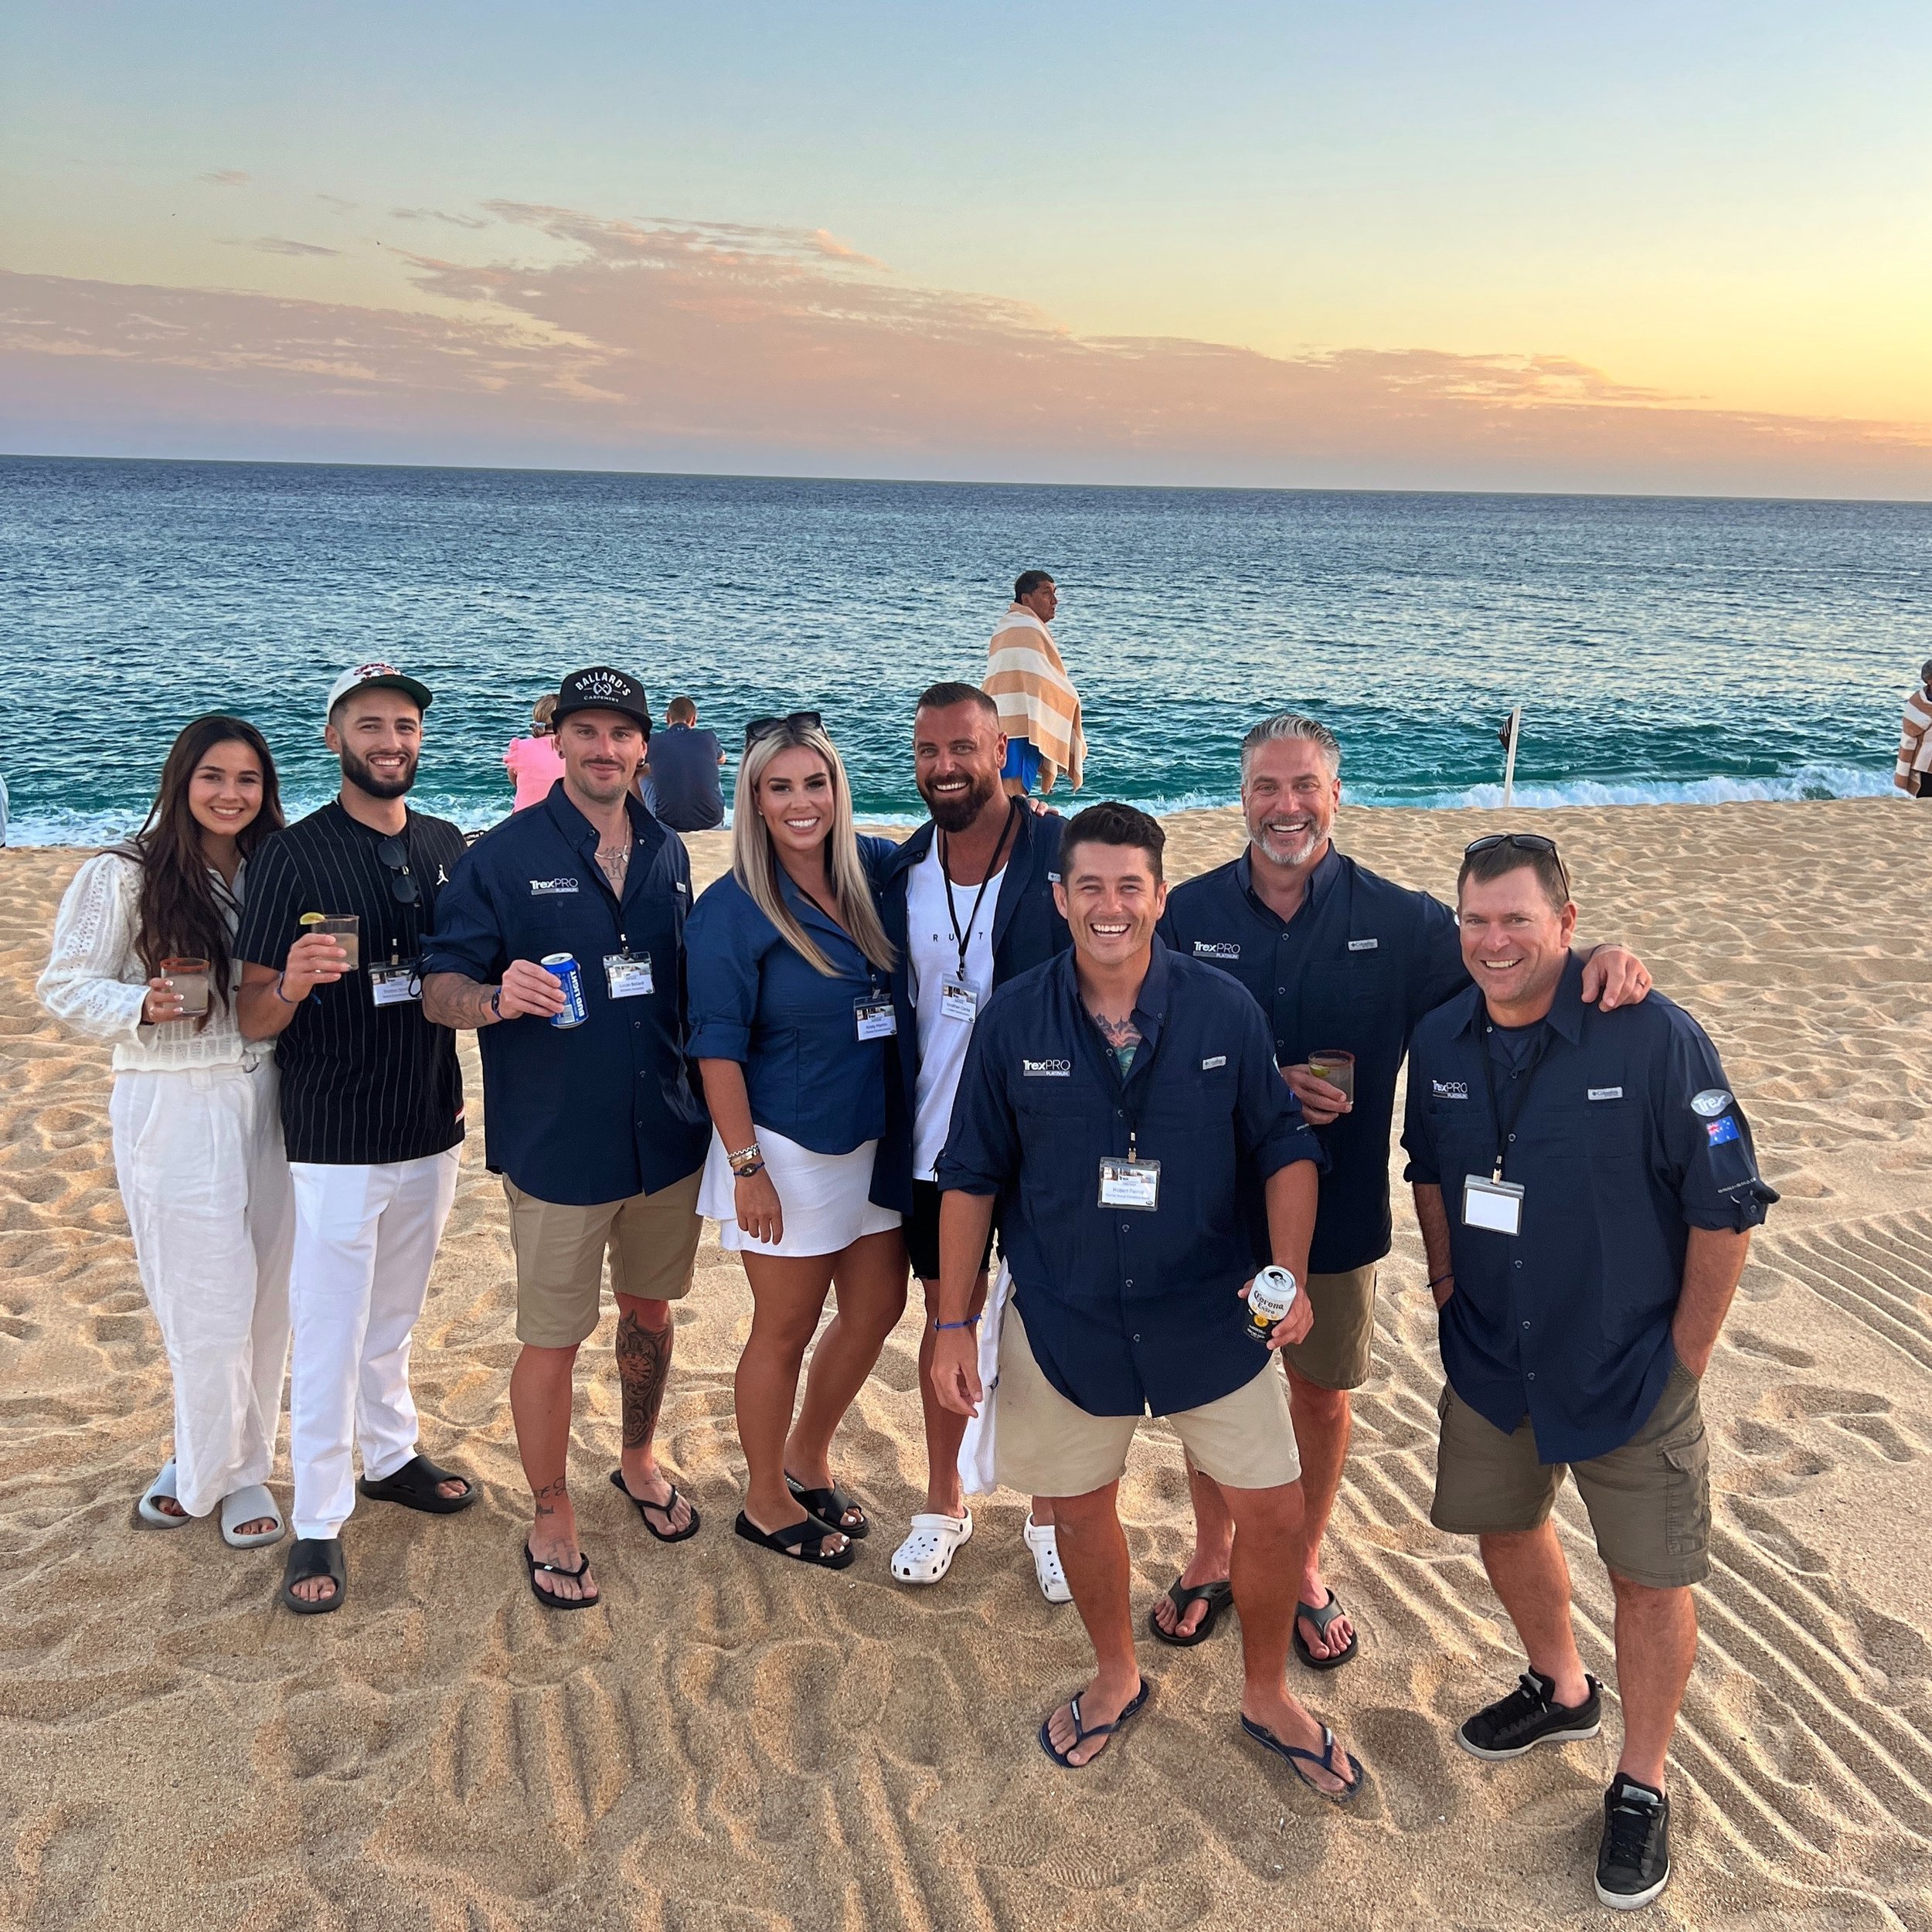 That&rsquo;s a wrap on Cabo 🇲🇽

We had the time of our lives over the past week all thanks to @trexcompany 

Stay tuned for some highlights of our trip coming soon&hellip;

#jclarkeconstructions #thedecksperts #trexproplatinum  #trexpropirates - Ap